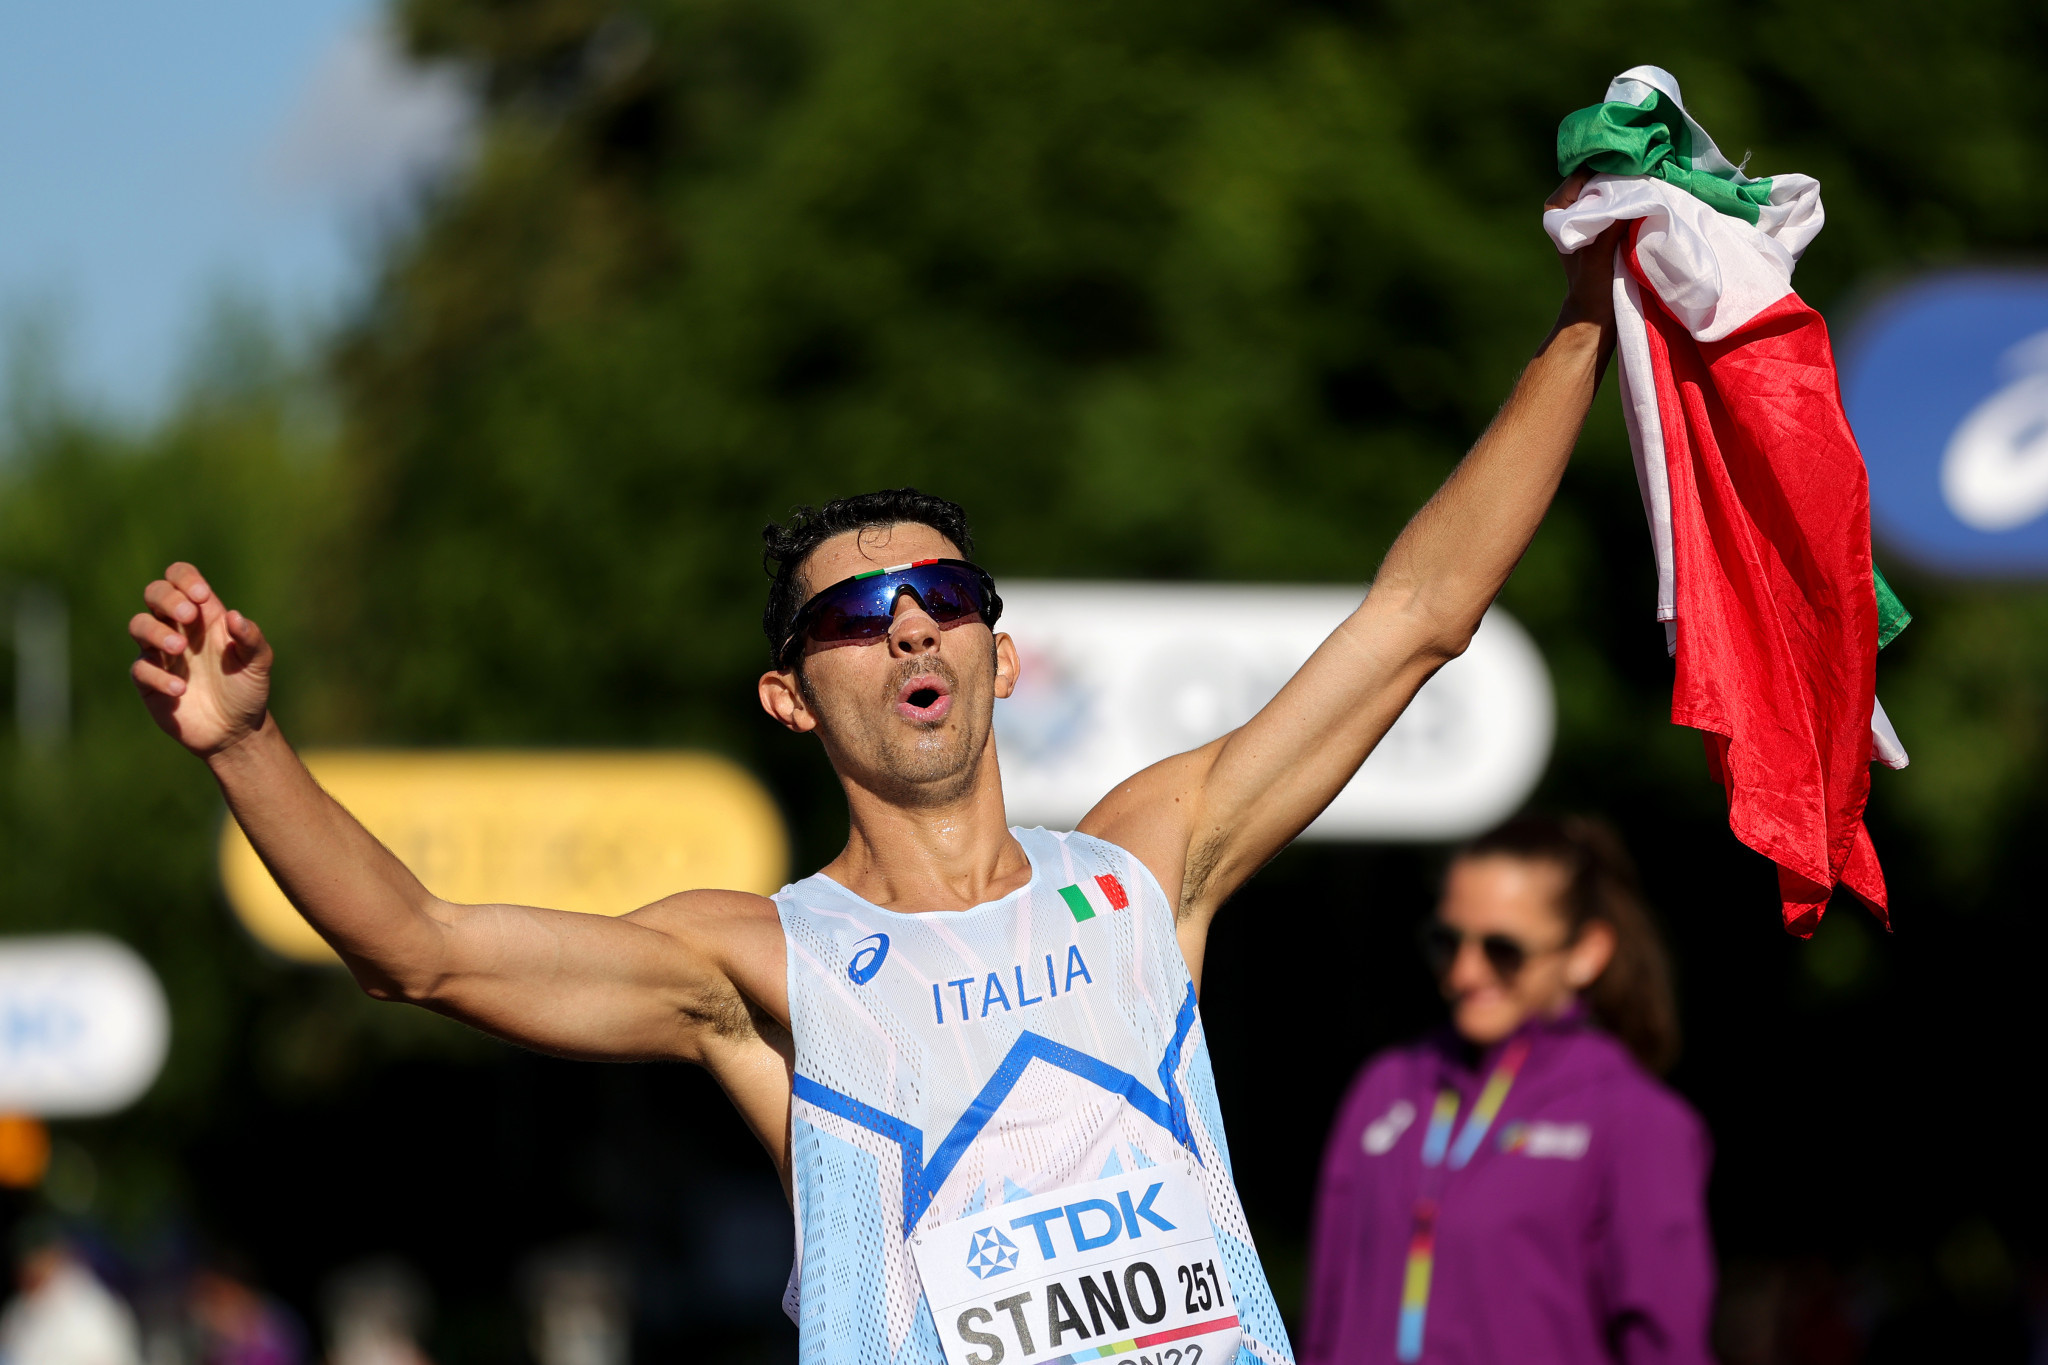 Massimo Stano won the first men's 35km race walk held at the World Athletics Championships ©Getty Images